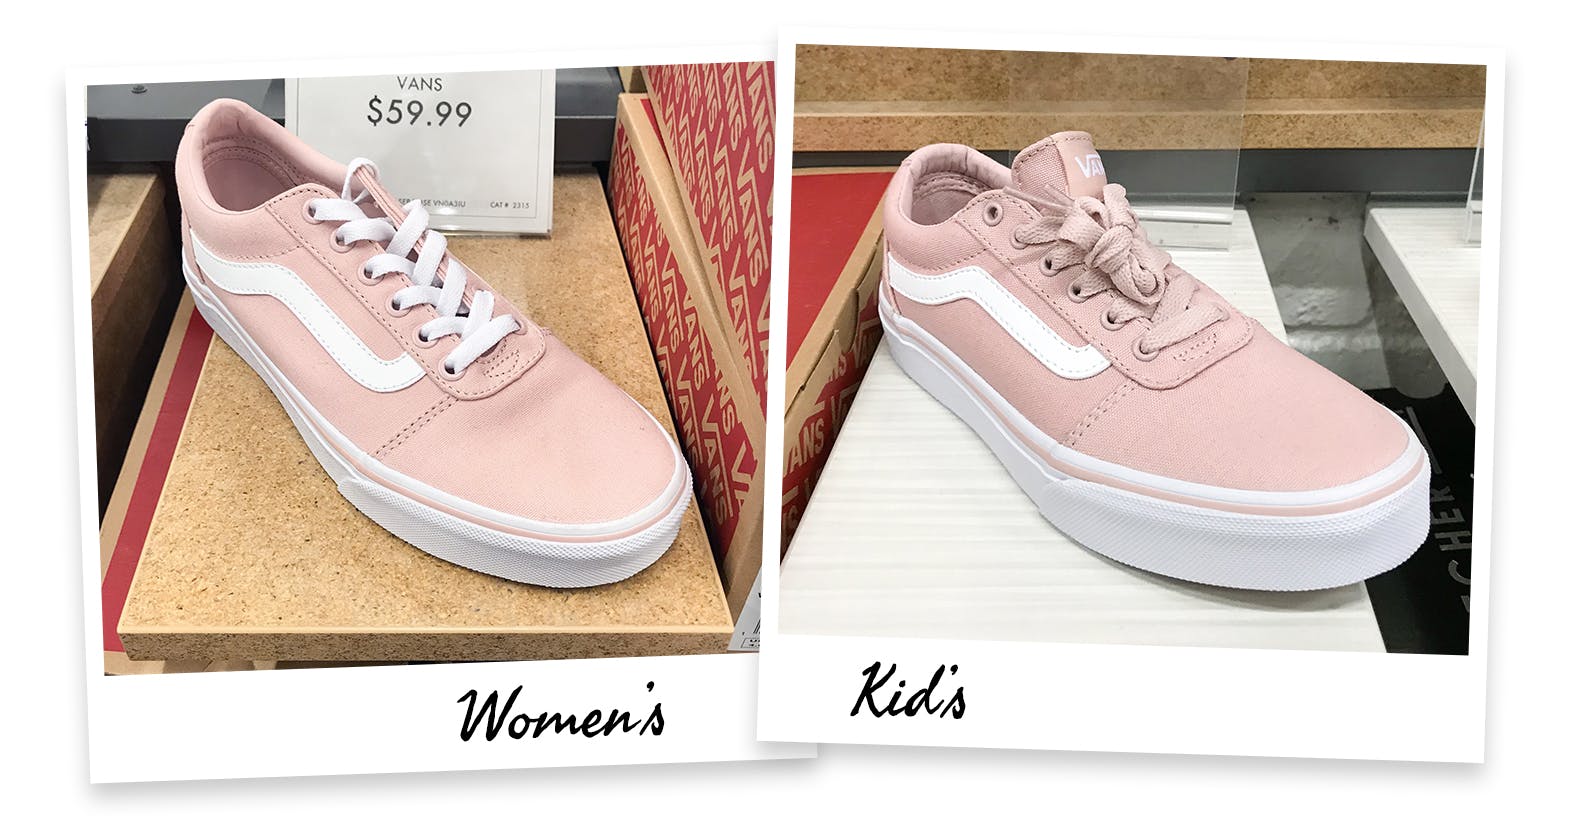 size 2 youth shoes in women's